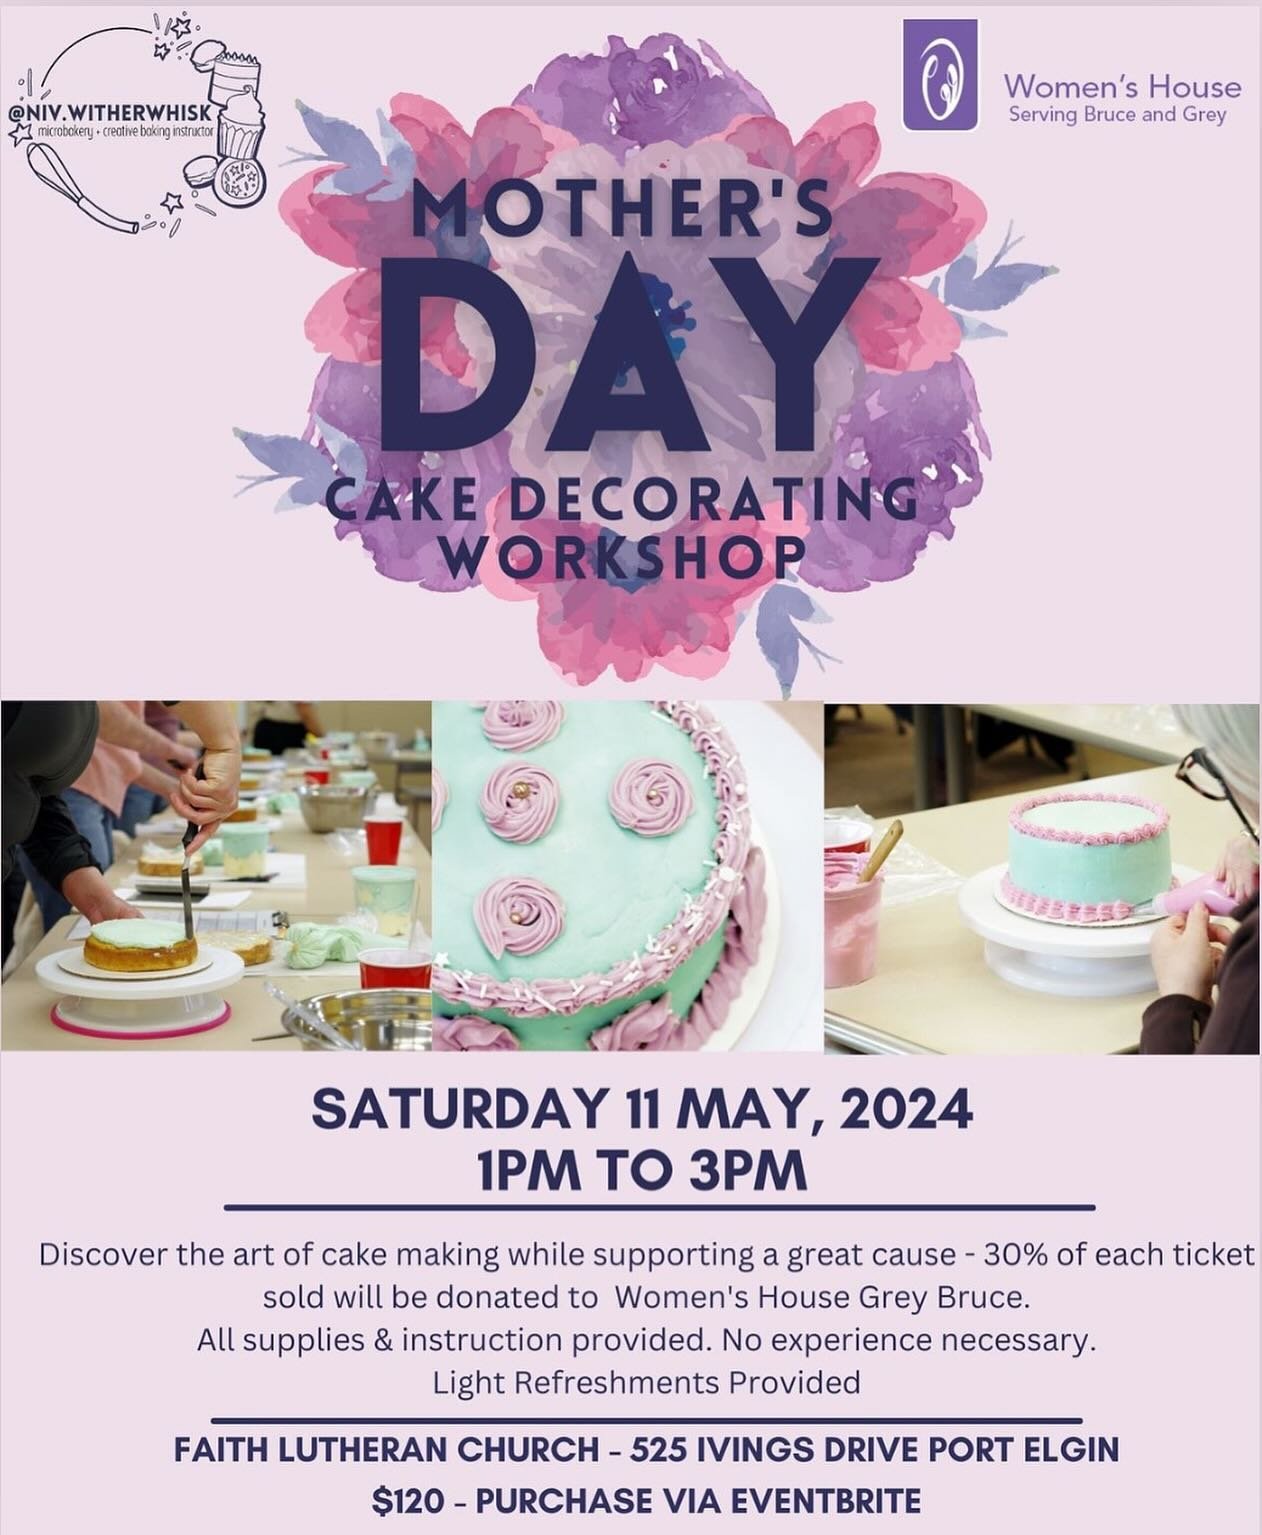 @niv.witherwhisk has a handful of tickets left for her Cake Decorating Workshop, Saturday May 11 from 1-3, in Port Elgin. A part of her ticket sales will be generously donated to Women&rsquo;s House. 

Follow the link for tickets: 

https://www.event